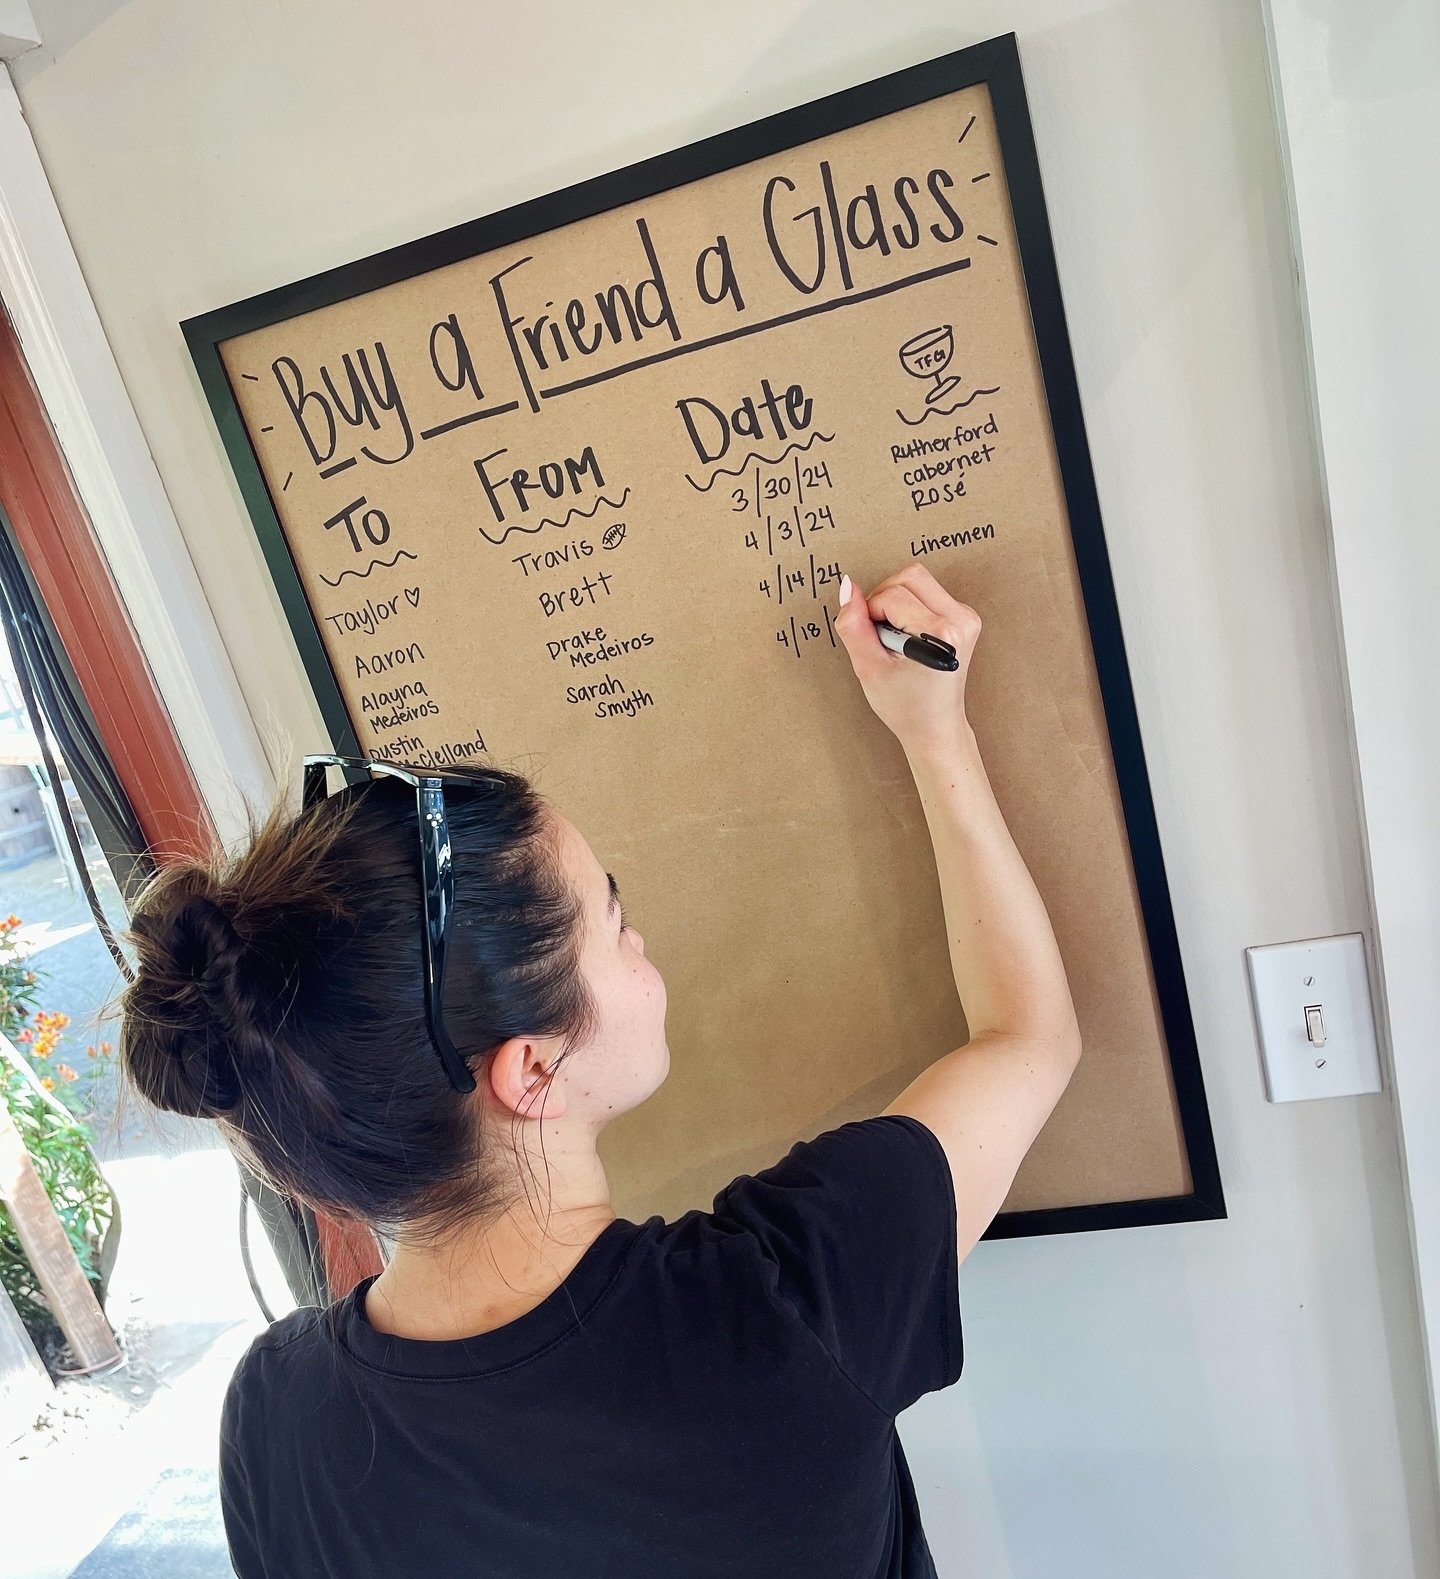 The &ldquo;Buy a Friend a Glass&rdquo; board is officially up at the tasting room and is already a big hit! Next time you&rsquo;re in the tasting room be sure to leave a drink for your friend, colleague, spouse, family member, or fellow club member. 